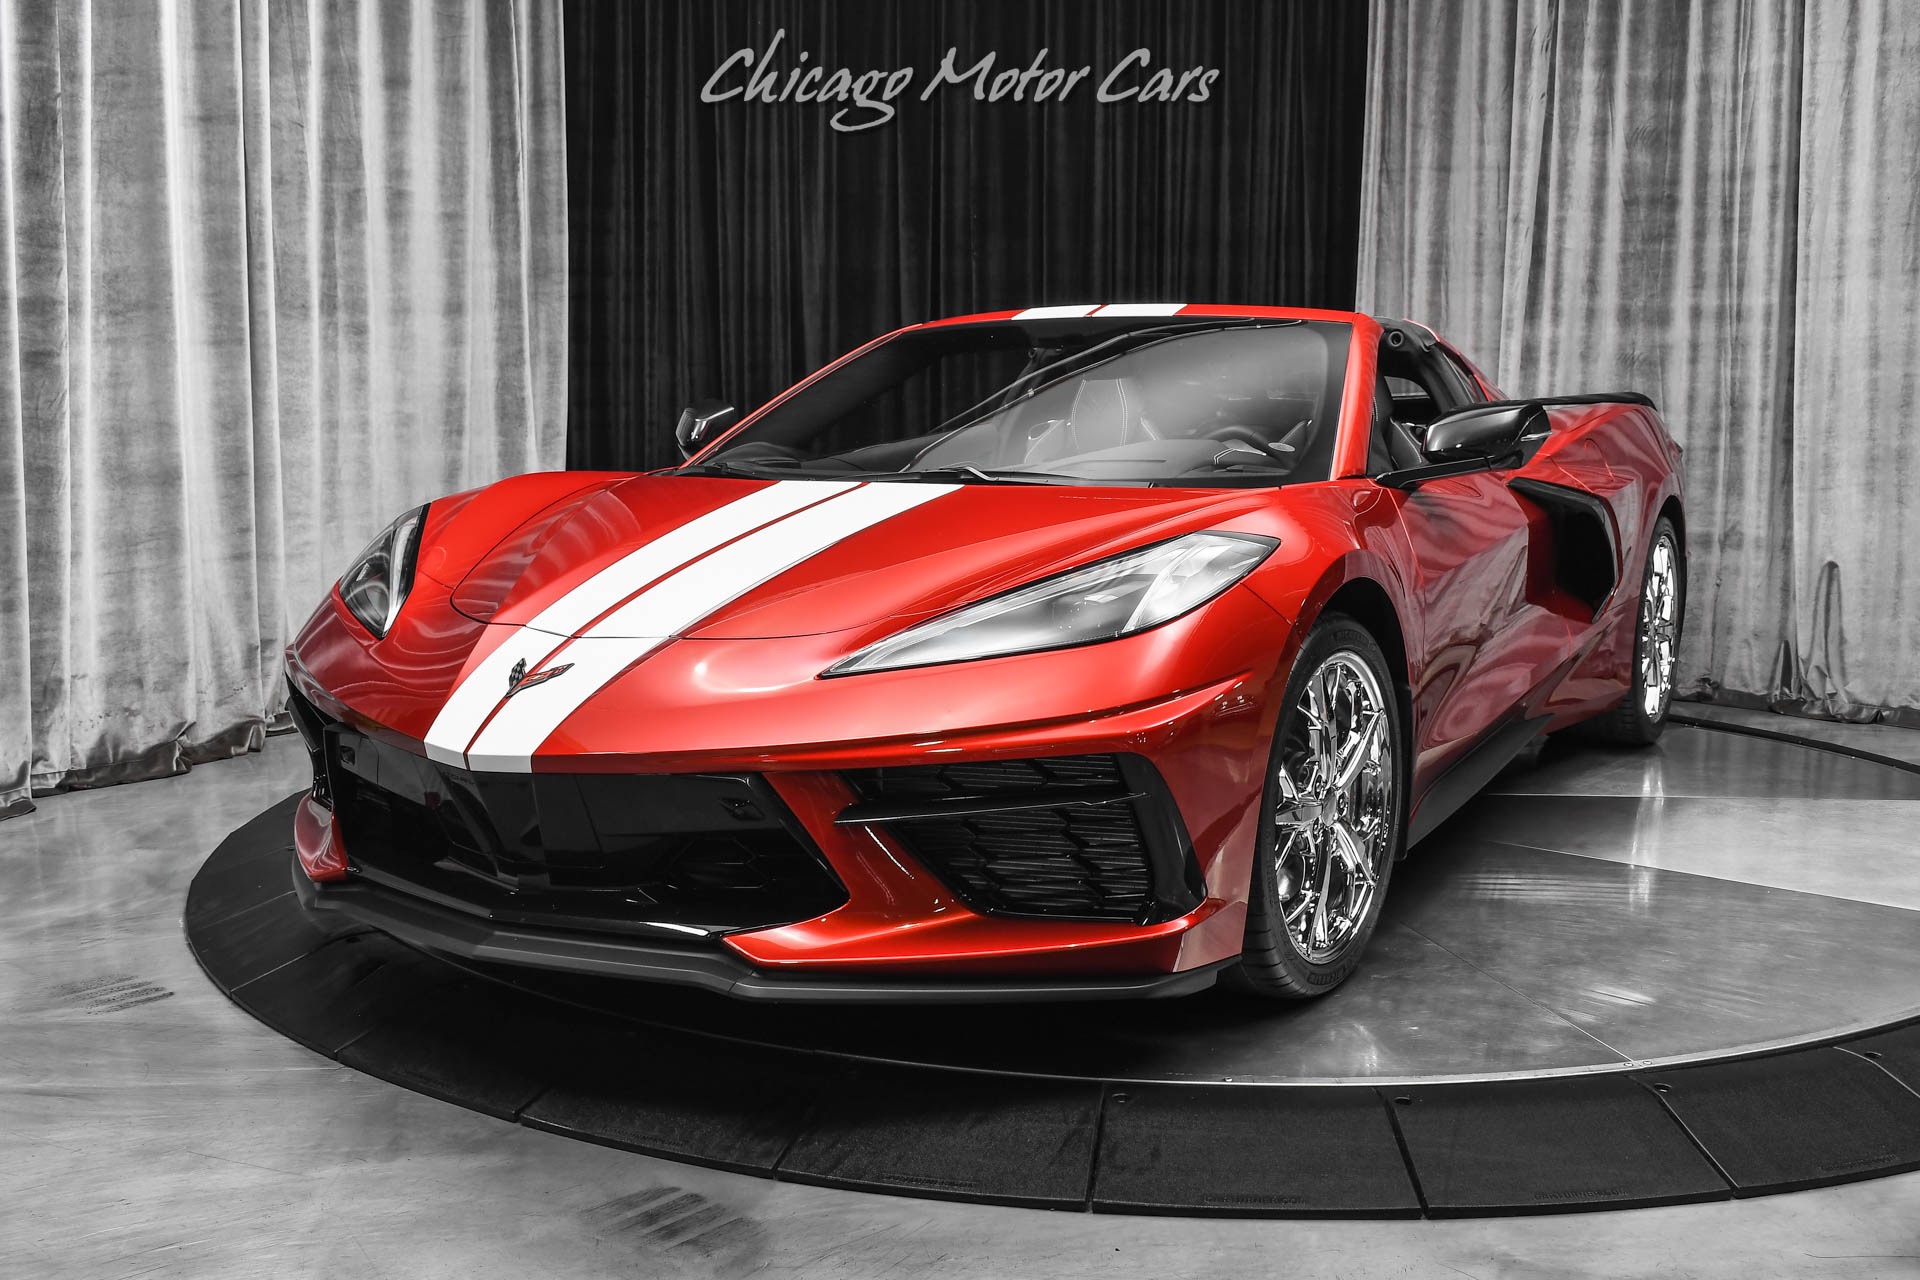 Used-2021-Chevrolet-Corvette-Stingray-2LT-C8-Coupe-with-Z51-HOT-Spec-Front-Lift-LOW-Miles-LOADED